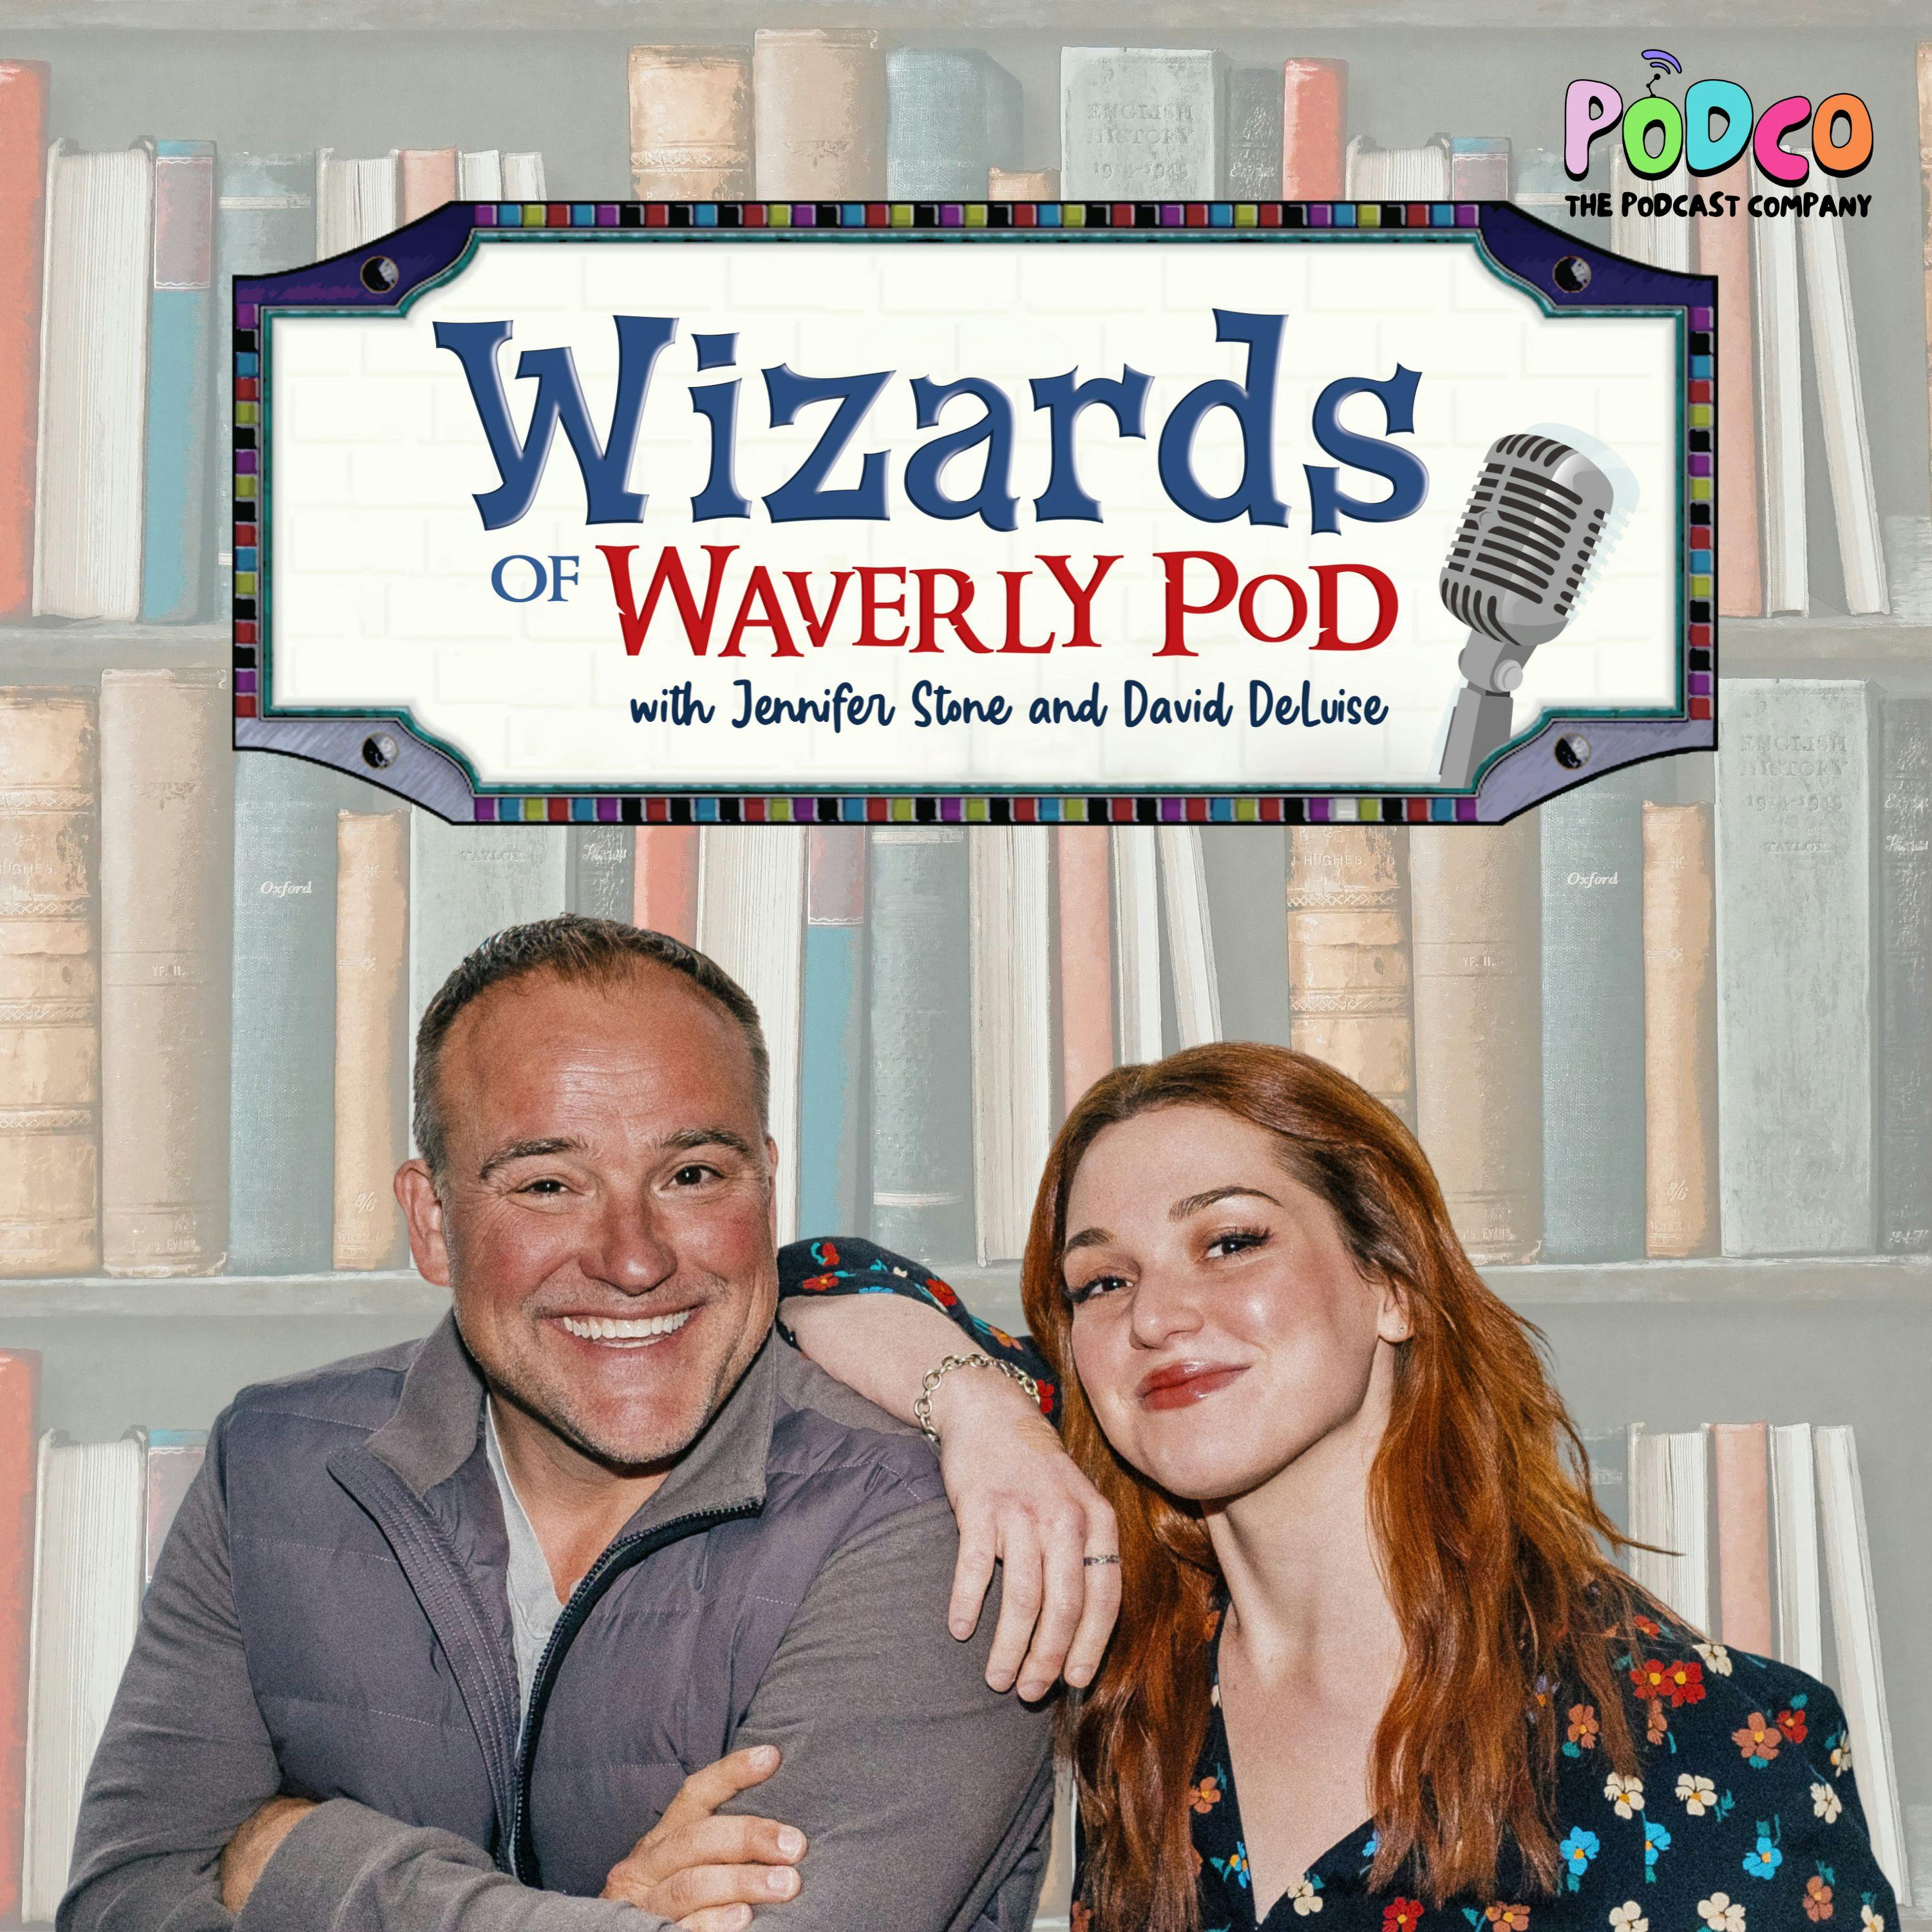 Wizards of Waverly Pod podcast show image